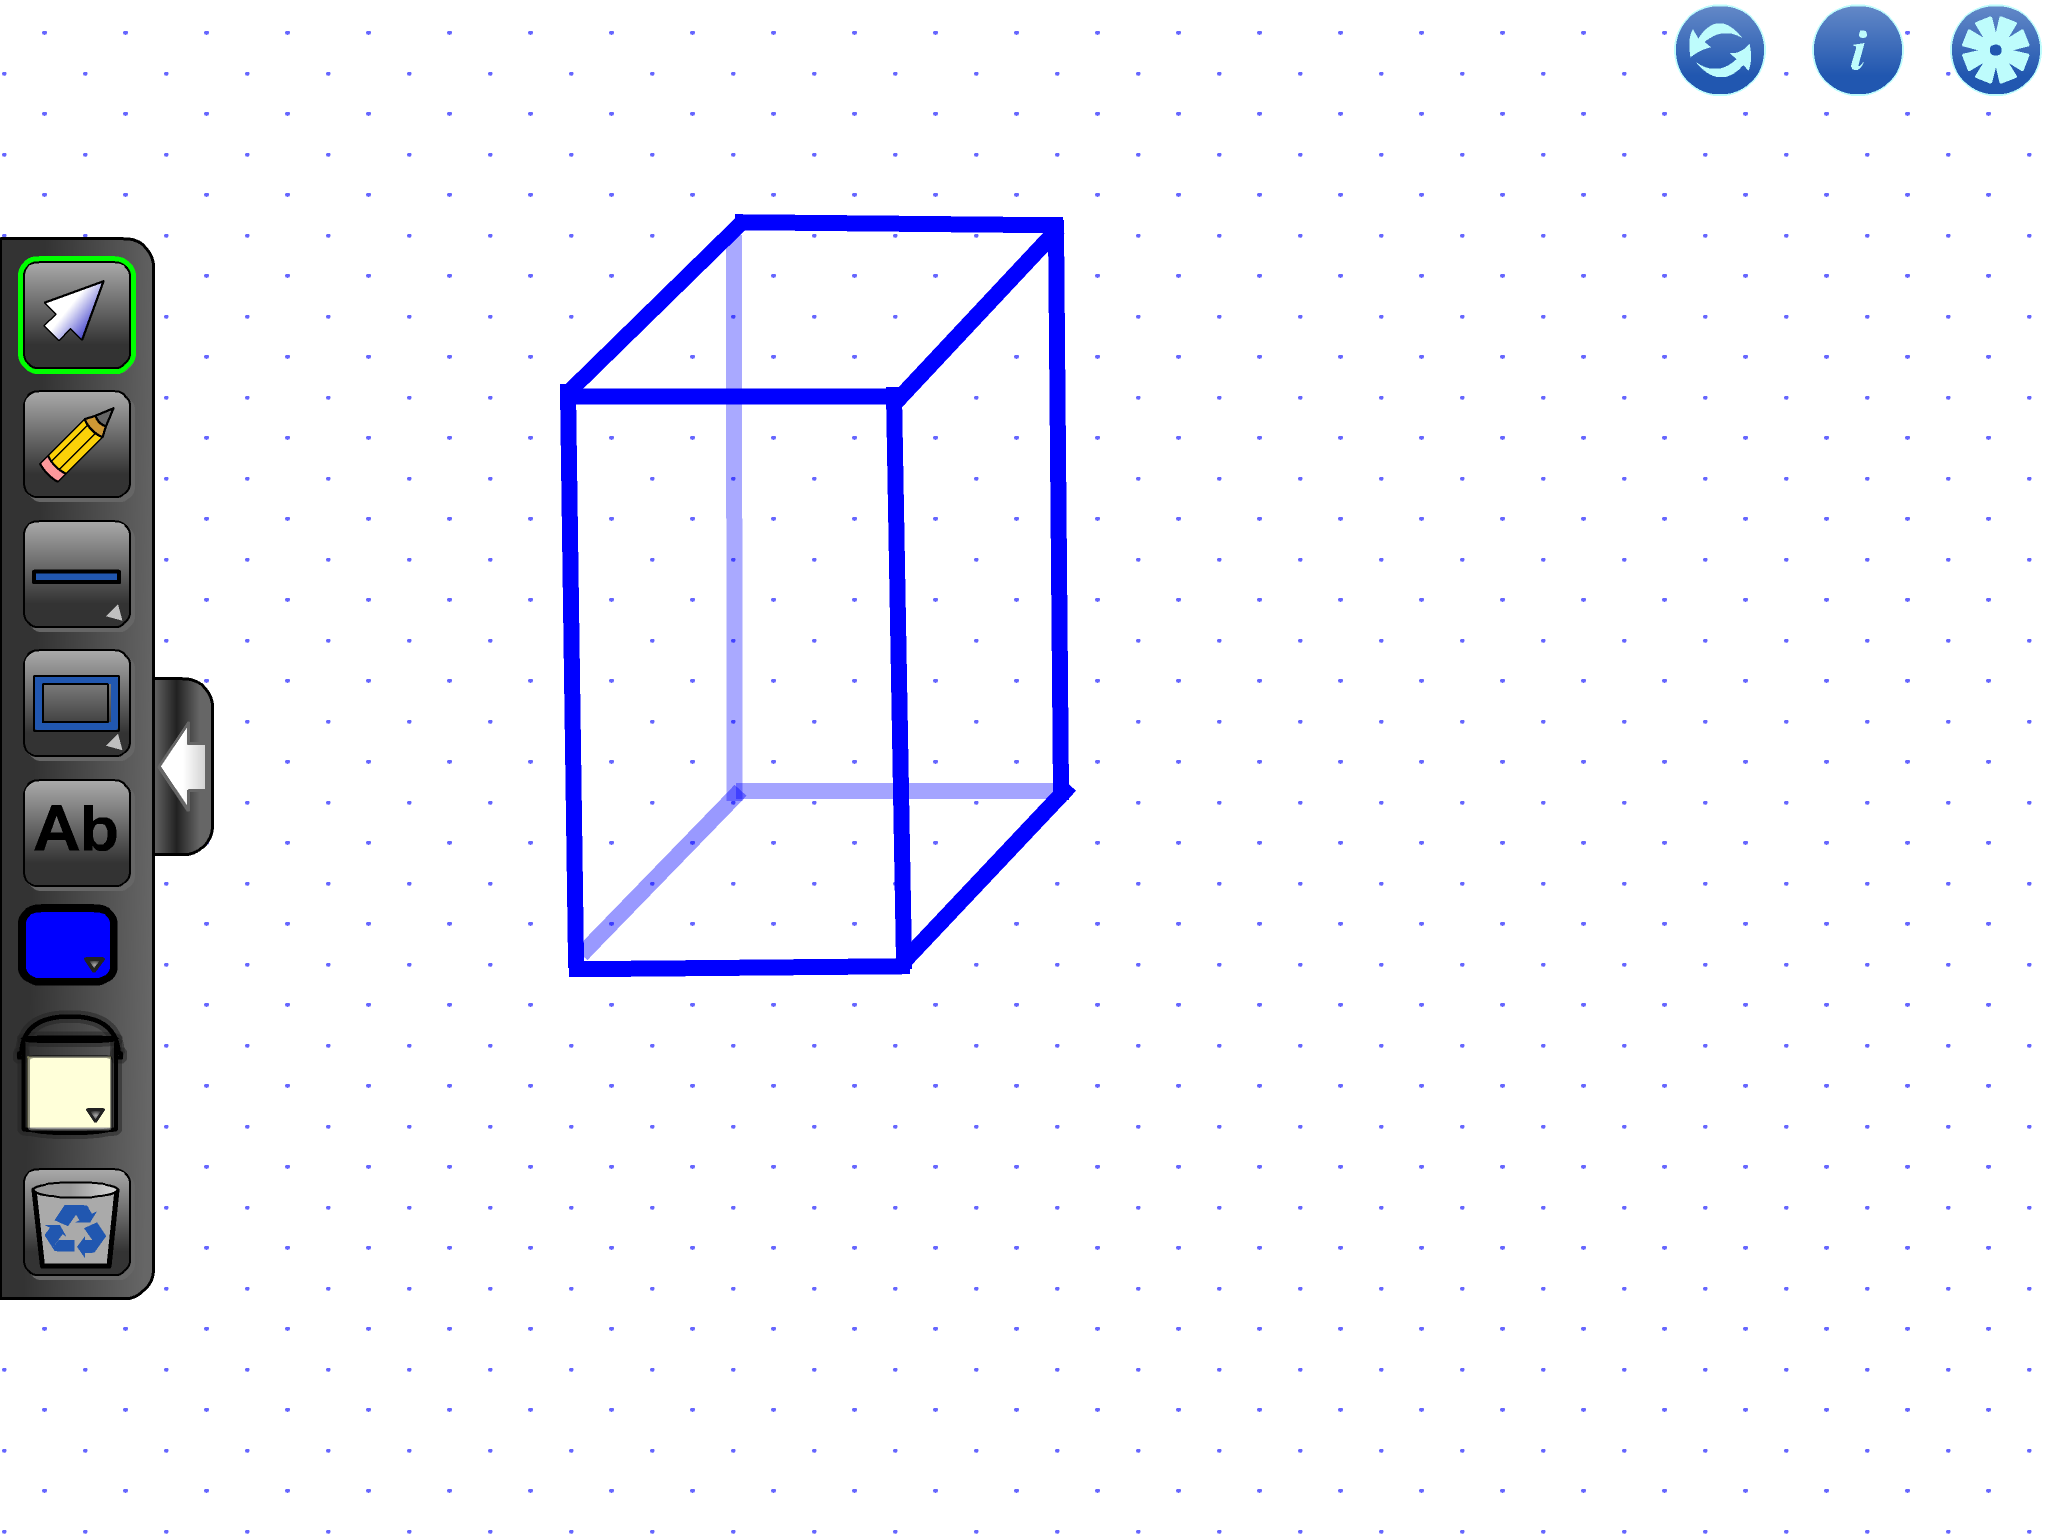 Isometric drawing of a prism